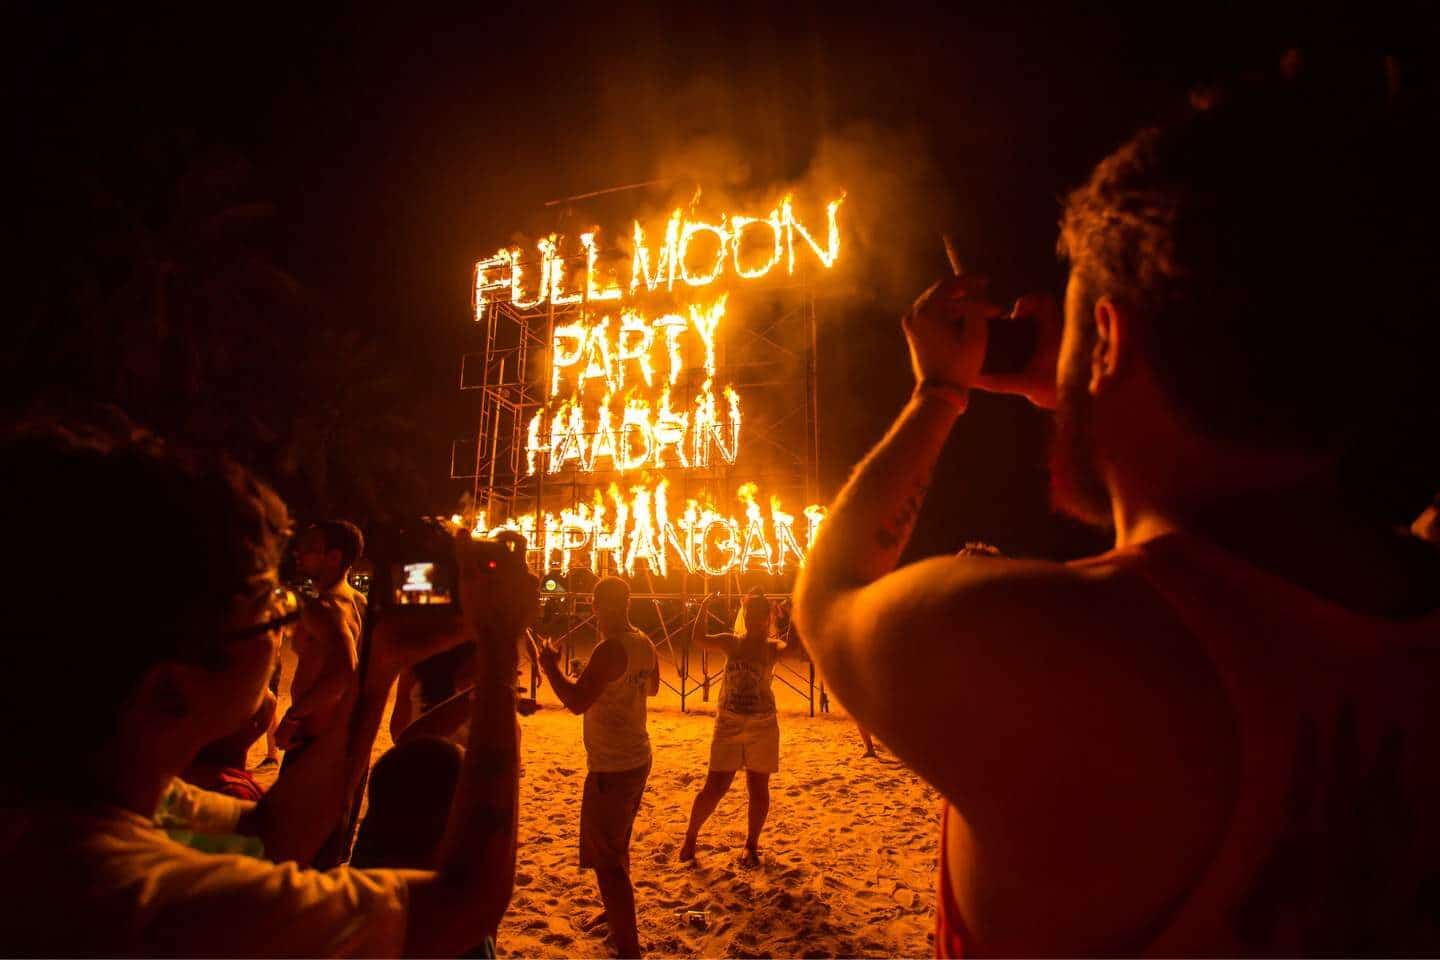 Full moon party fire sign on